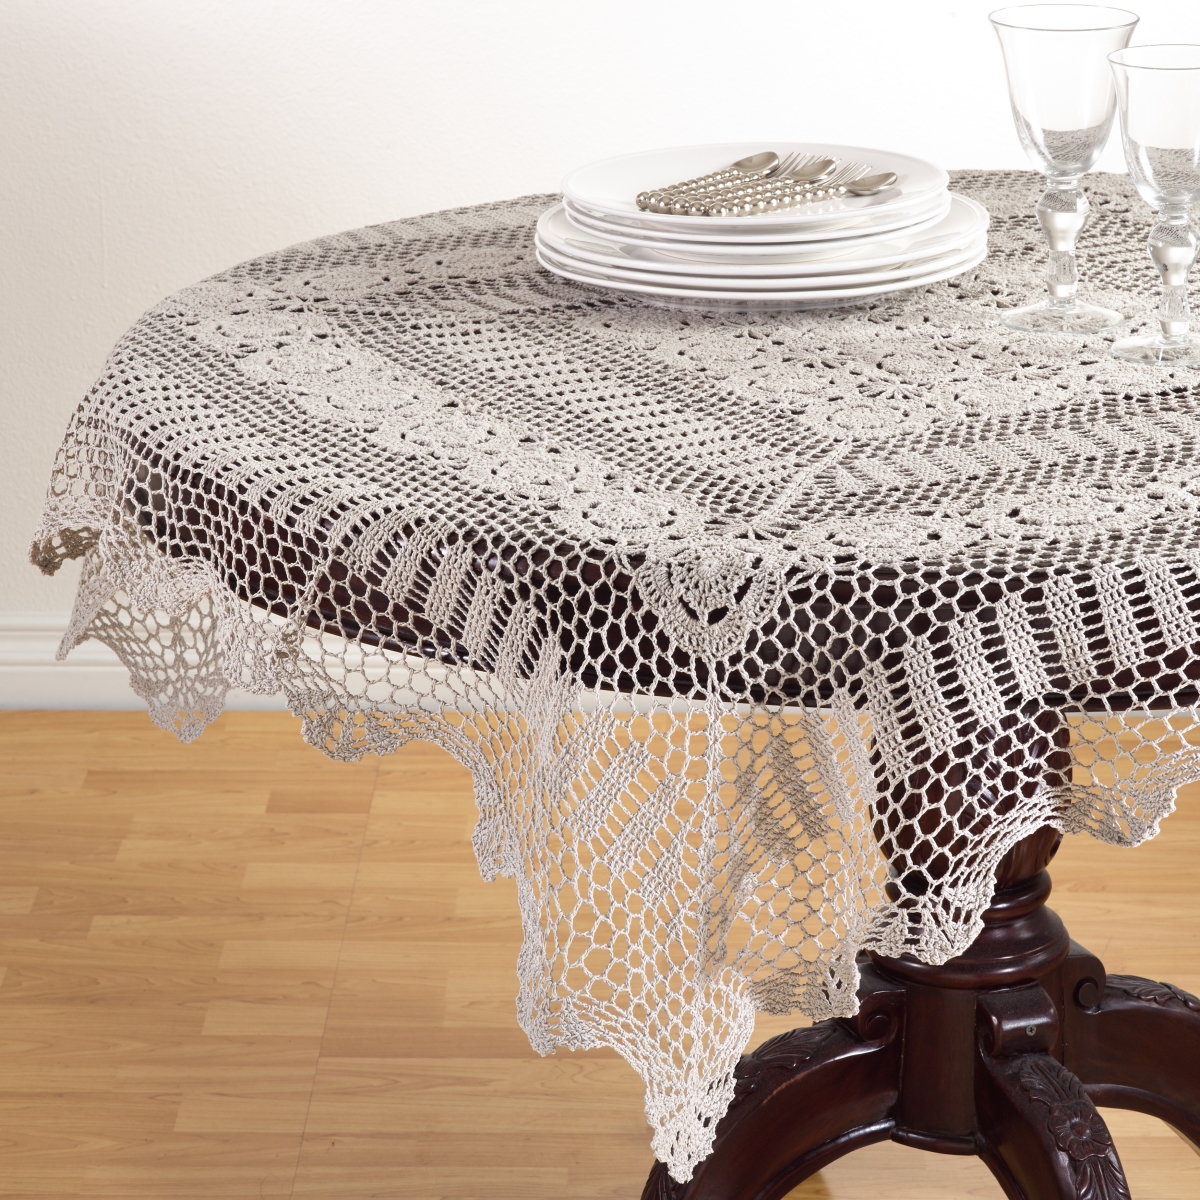 869.gy54s 54 In. Square Handmade Crochet Cotton Lace Table Linens - Grey